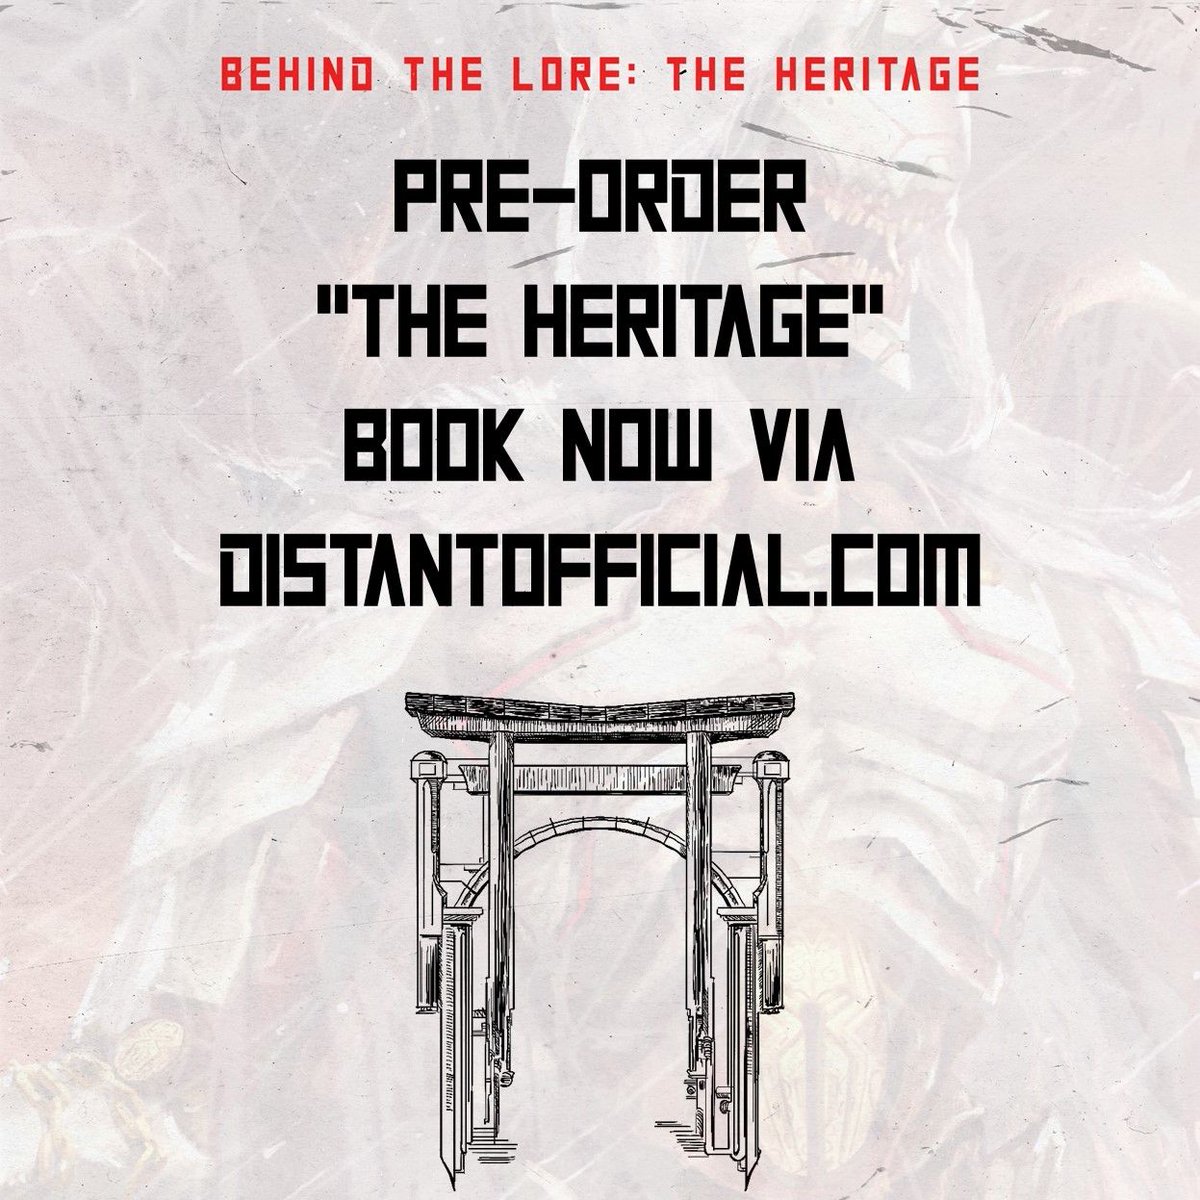 The just announced “The Heritage” book details what goes on in the lyrics of “Heritage”. Figure out how “Paradigm Shift” resonates with our lore and pre-order The Heritage from our website! 📖🔥